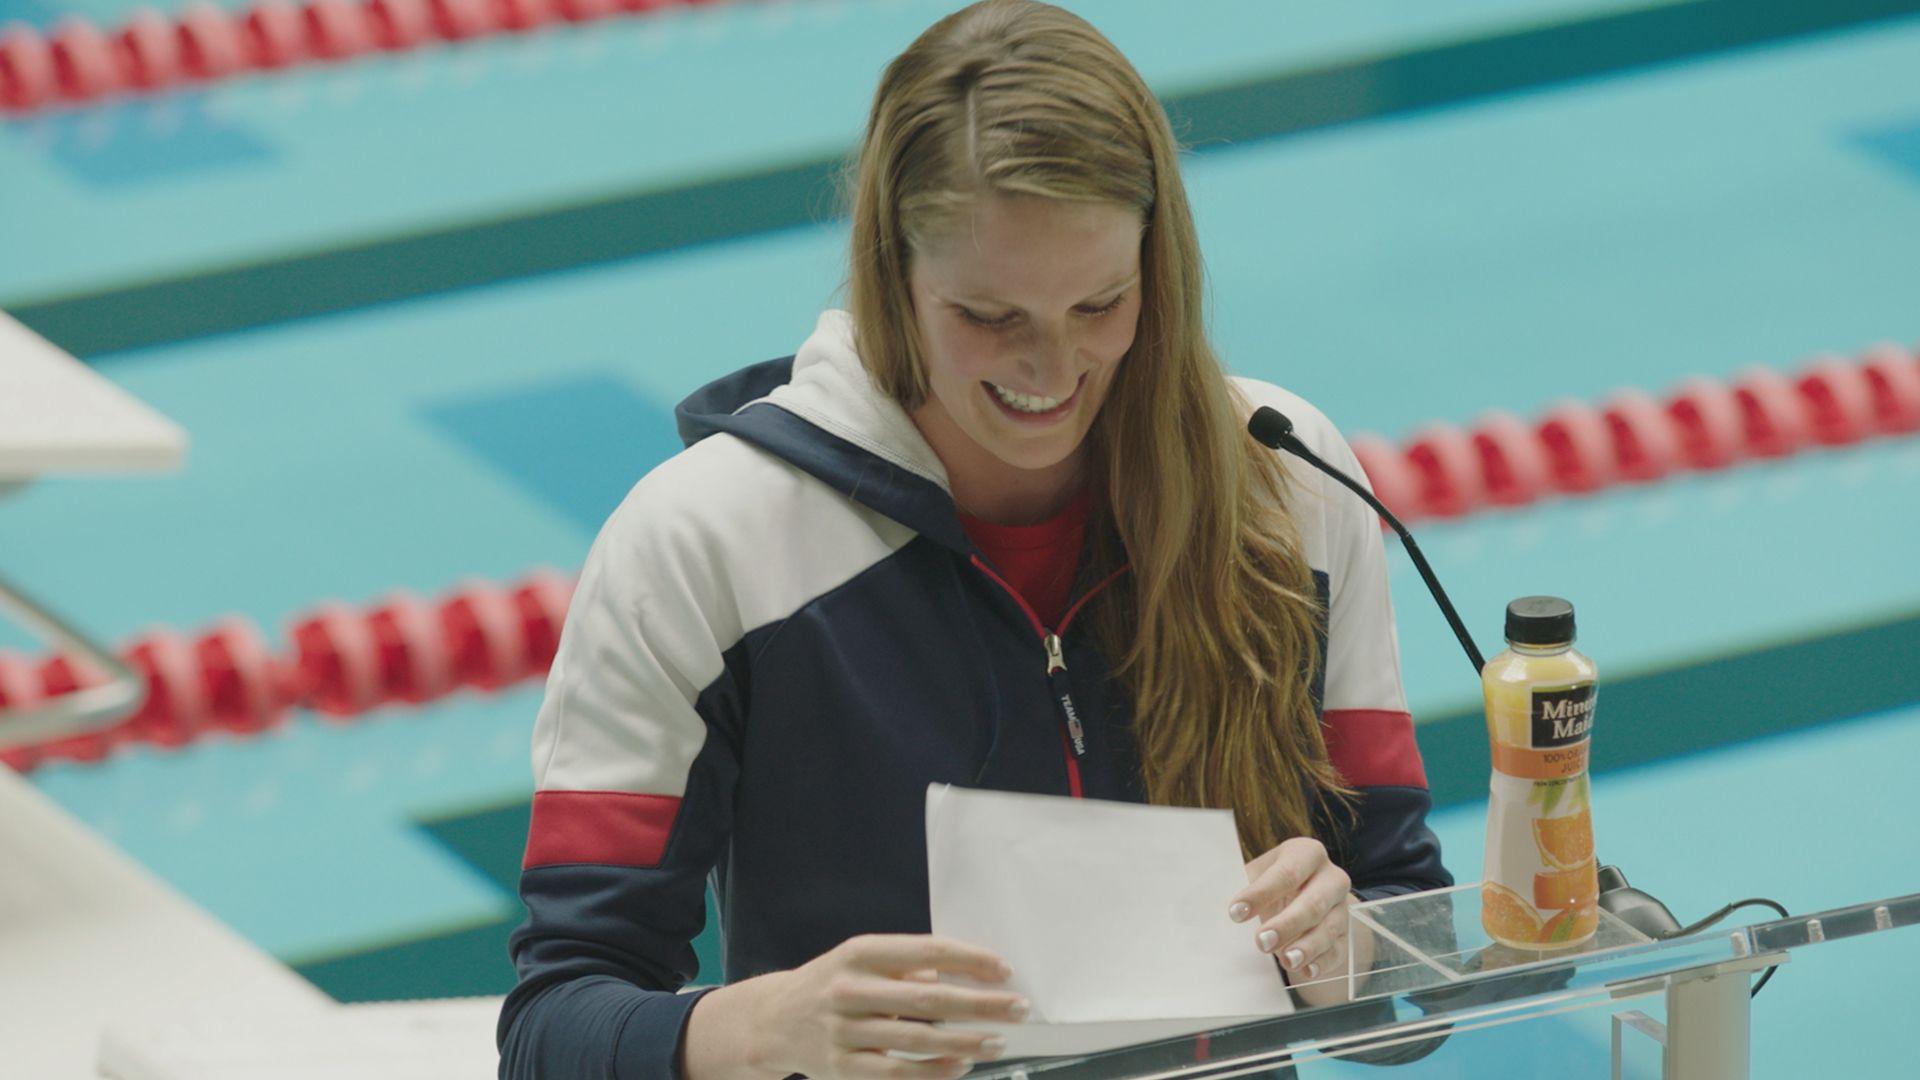 Video) Missy Franklin and Minute Maid Celebrate Olympic Parents